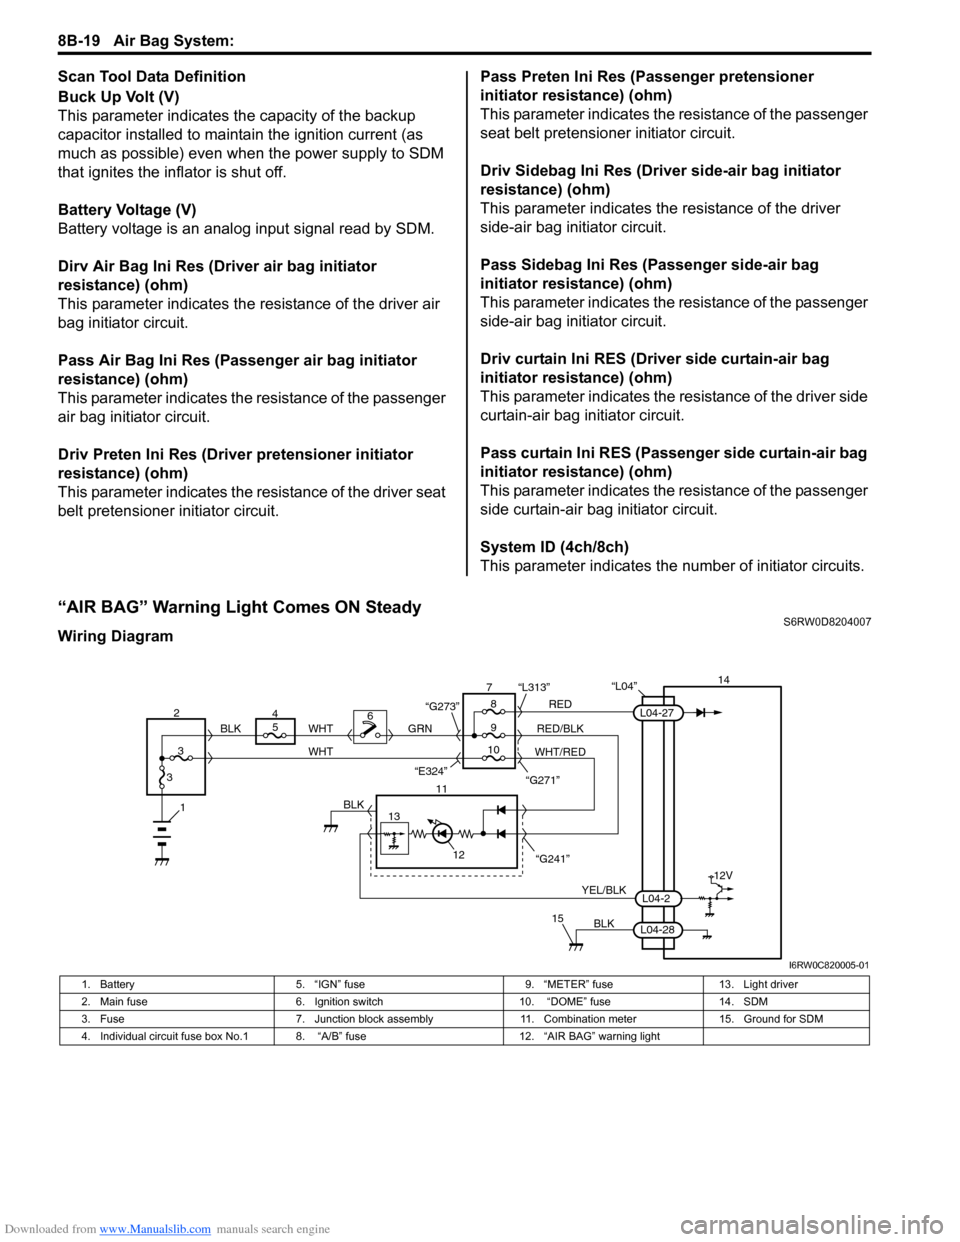 SUZUKI SX4 2006 1.G Service Workshop Manual Downloaded from www.Manualslib.com manuals search engine 8B-19 Air Bag System: 
Scan Tool Data Definition
Buck Up Volt (V)
This parameter indicates the capacity of the backup 
capacitor installed to m